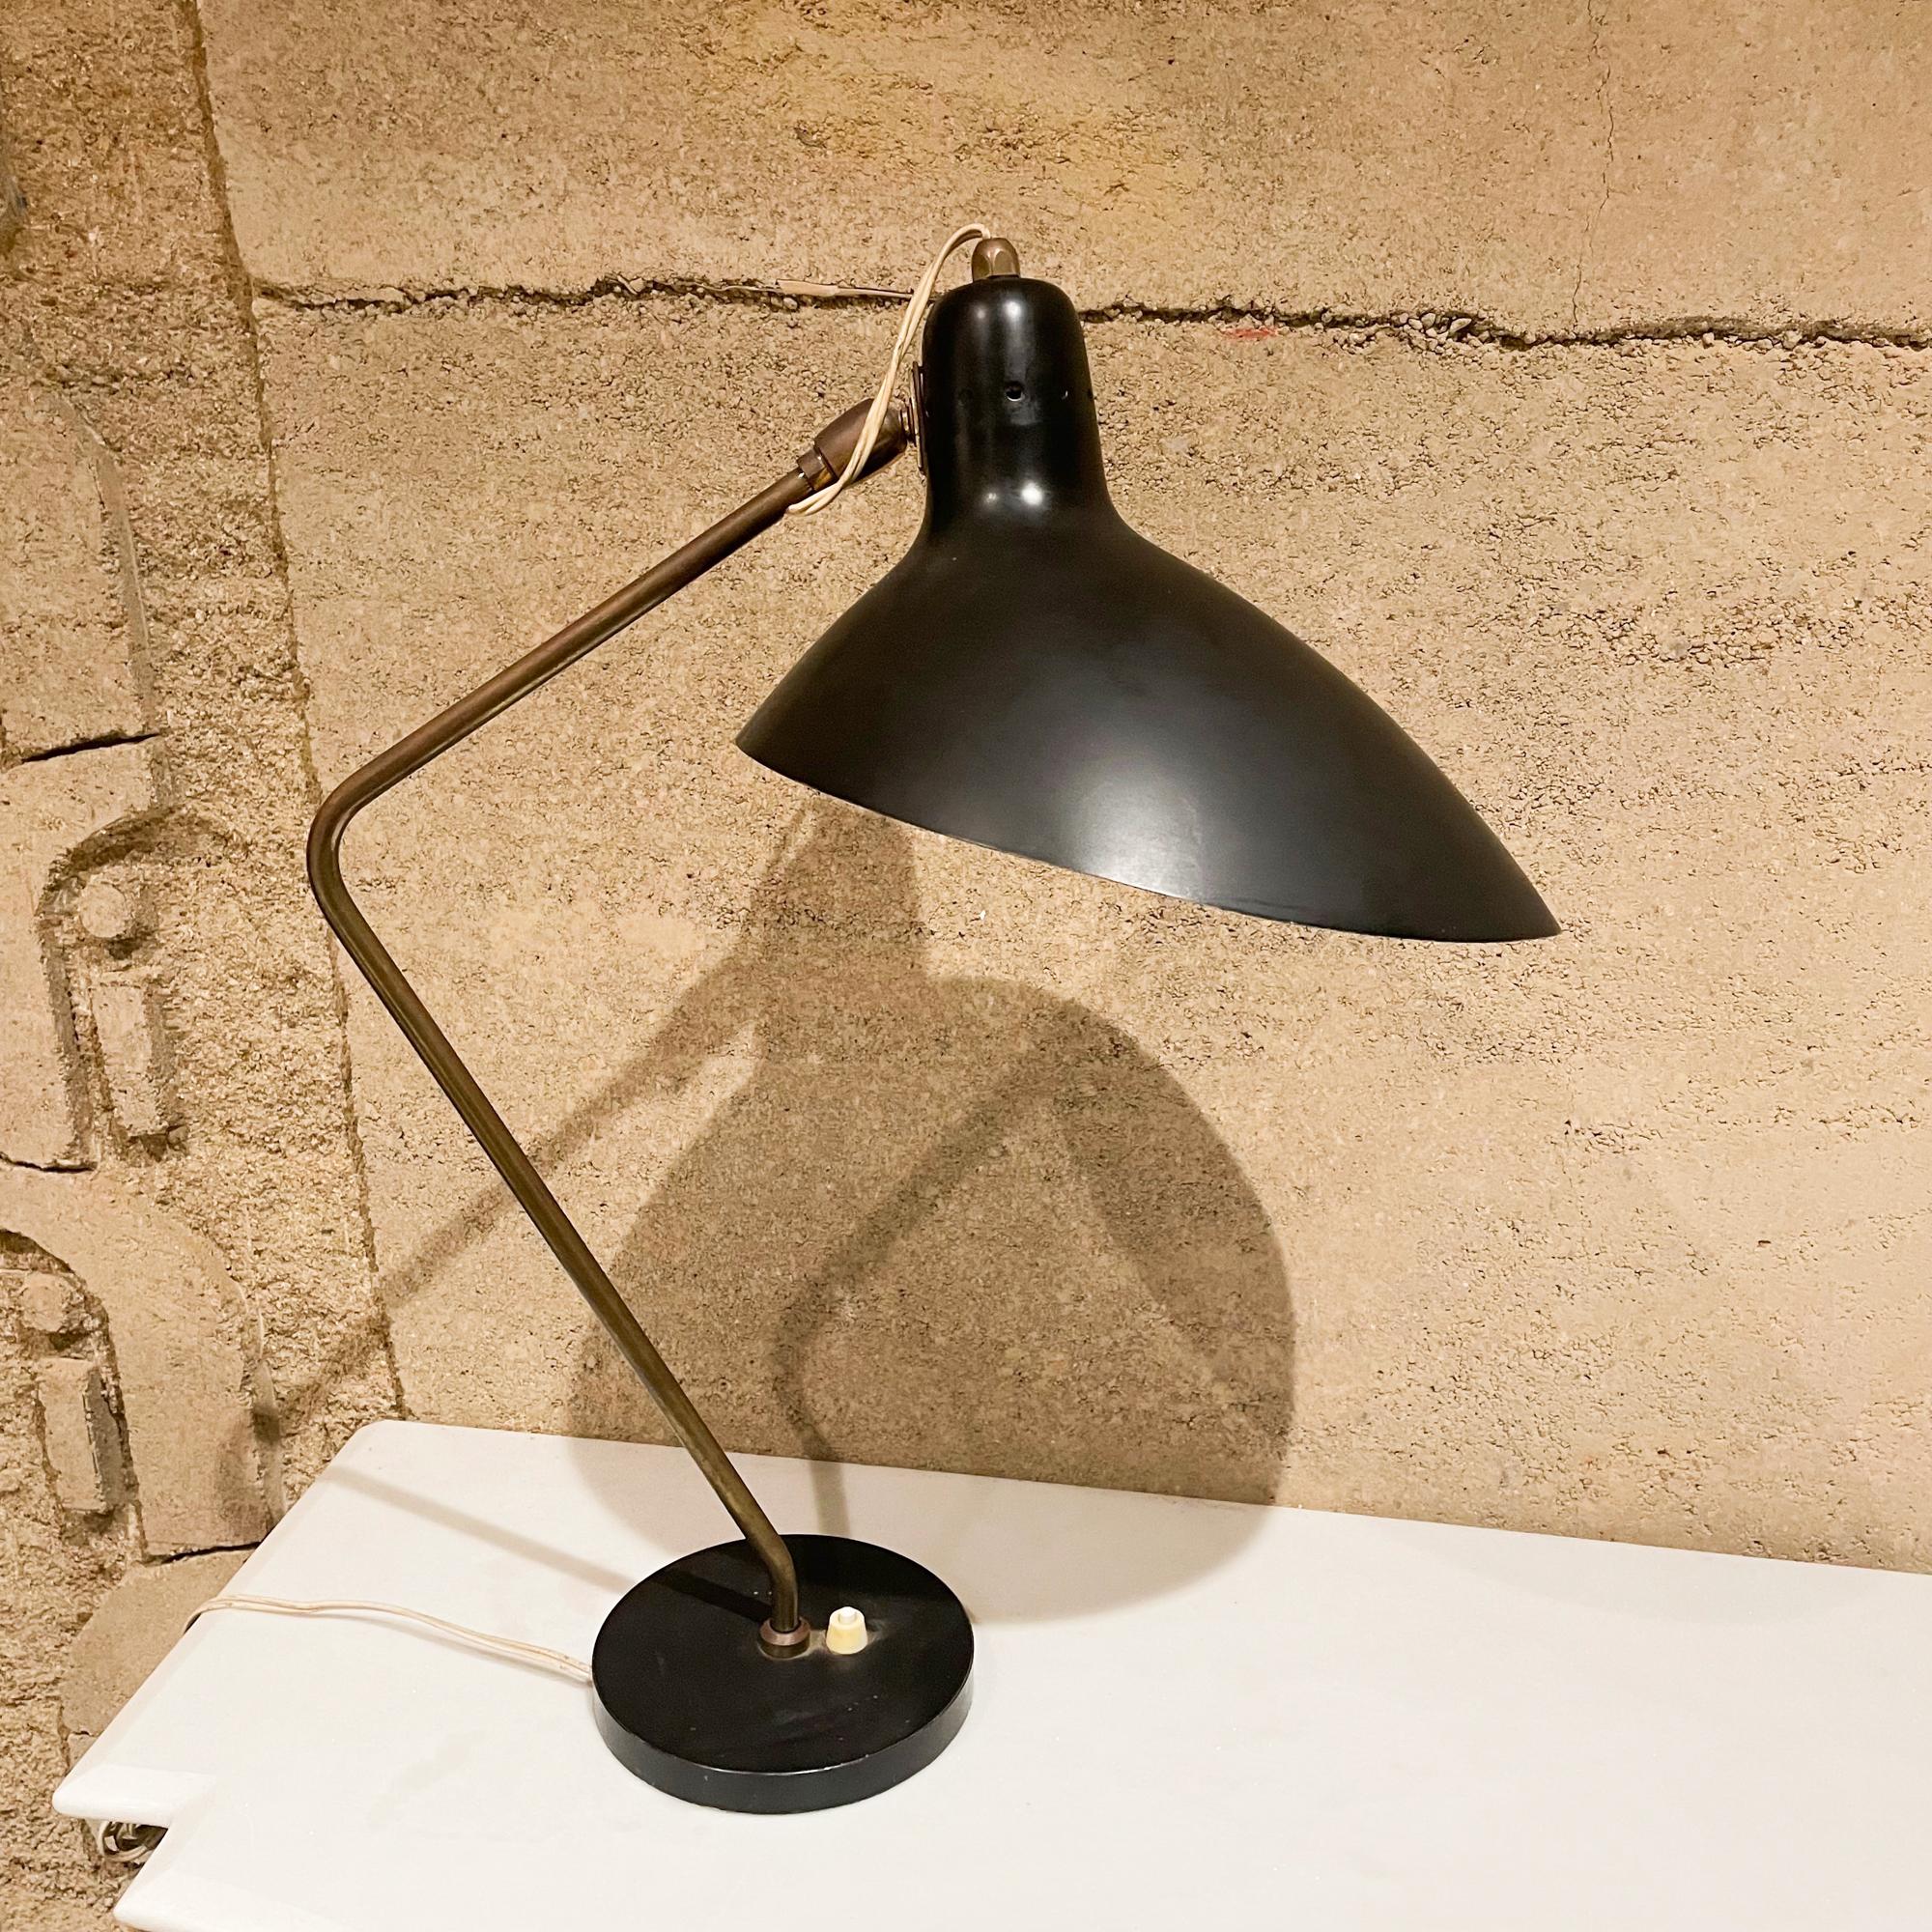 Table lamp
Fabulous midcentury French table desk lamp in black. Unmarked. Design attributed to Vittoriano Vigano and in the style of Serge Mouille.
The lamp is vintage, made in France circa 1950s. Retains original bayonet socket. Bayonet bulbs are